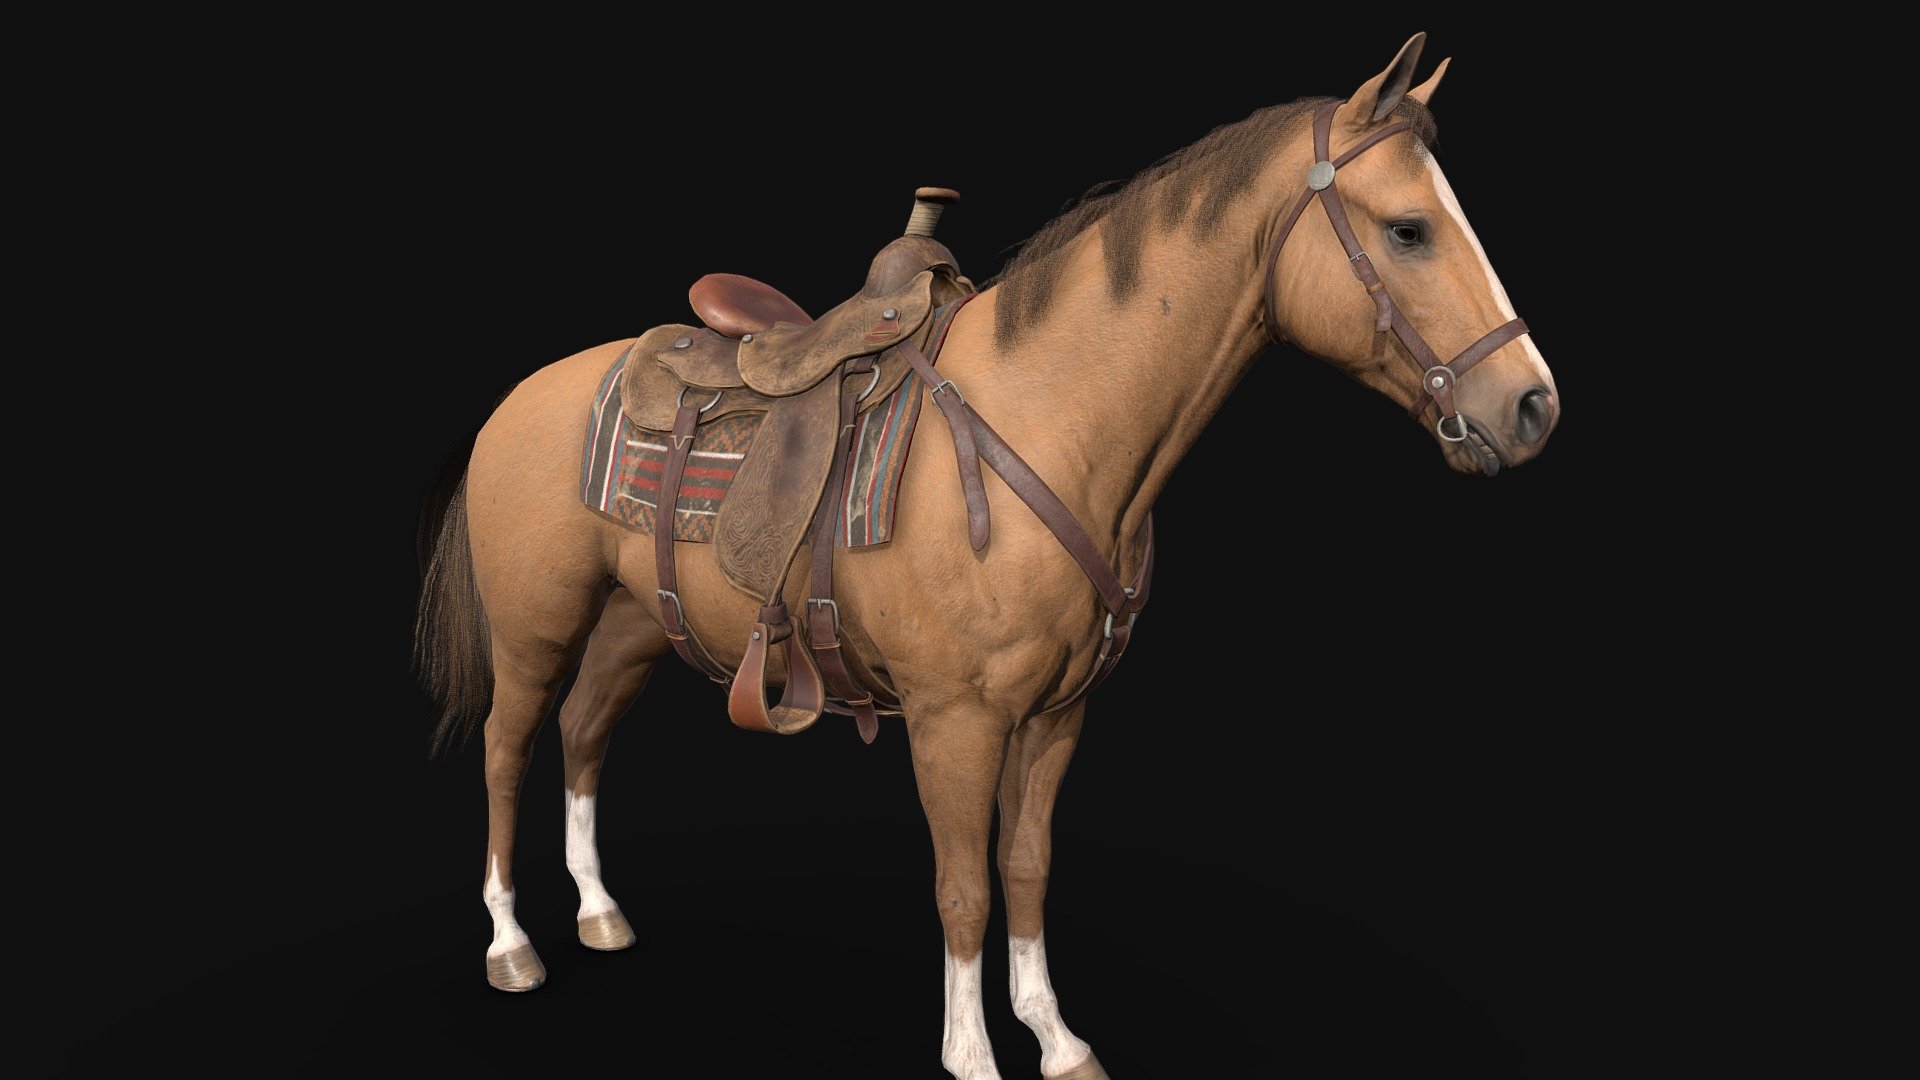 Step into the rugged and untamed world of the Wild West with meticulously crafted 3D model of a horse, adorned with an array of authentic props from the era that defined the frontier spirit. This stunning Sketchfab model transports you back in time to the days of cowboys, outlaws, and adventure on the open range.
Whether you're a 3D artist looking for a reference model or simply a fan of the Wild West era, this Sketchfab model is a true gem. It's a timeless representation of a bygone era, where the spirit of adventure, the open range, and the bond between a cowboy and their horse defined the American frontier. Saddle up and explore the Wild West like never before with this remarkable 3D model.

Also you can find Uploaded file with rigg of horse.

Ejoy it 3d model